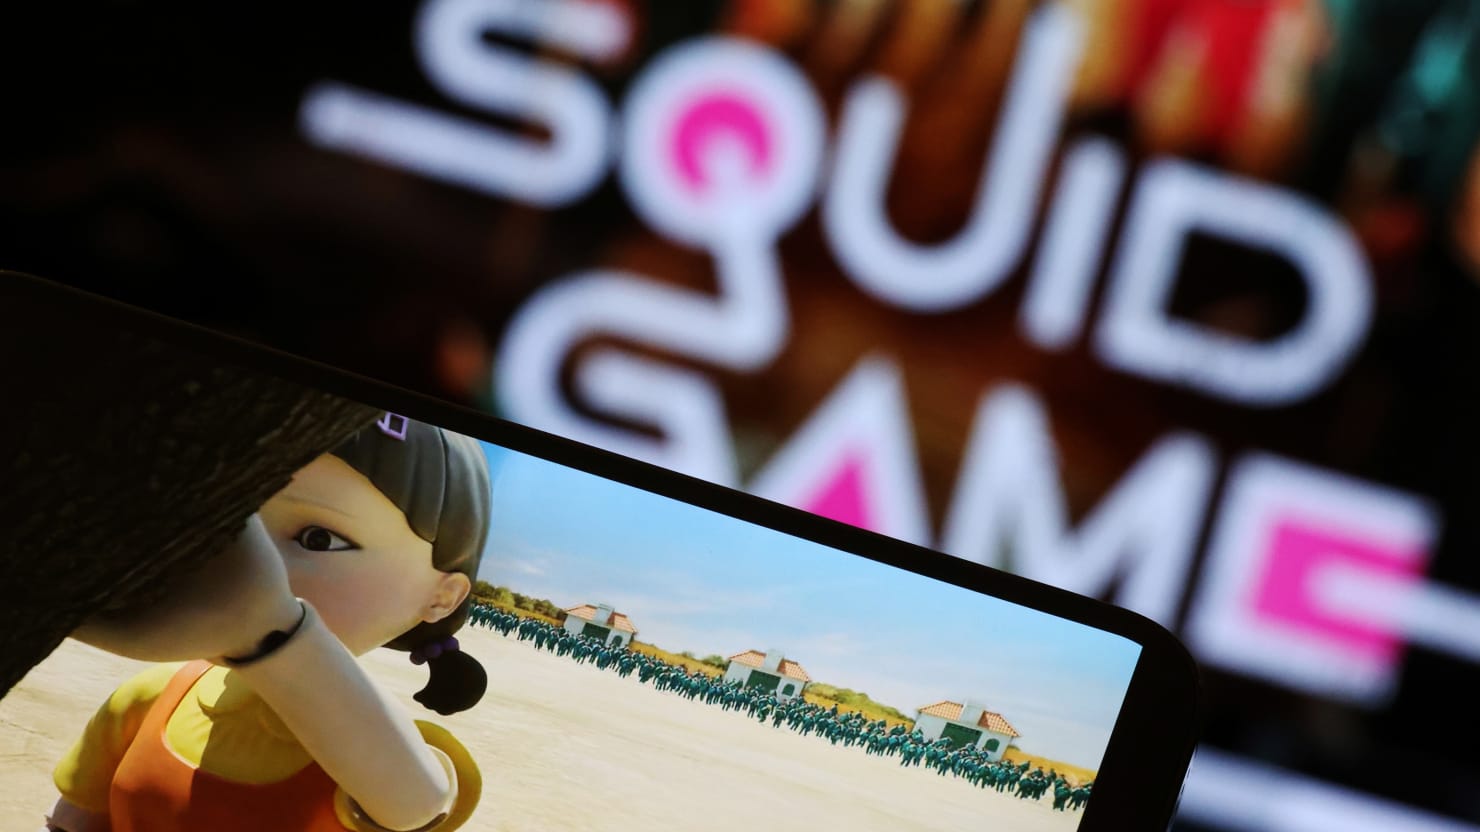 Squid Game: The Challenge' Players Seeking To File Lawsuit Against Netflix, Zee News English